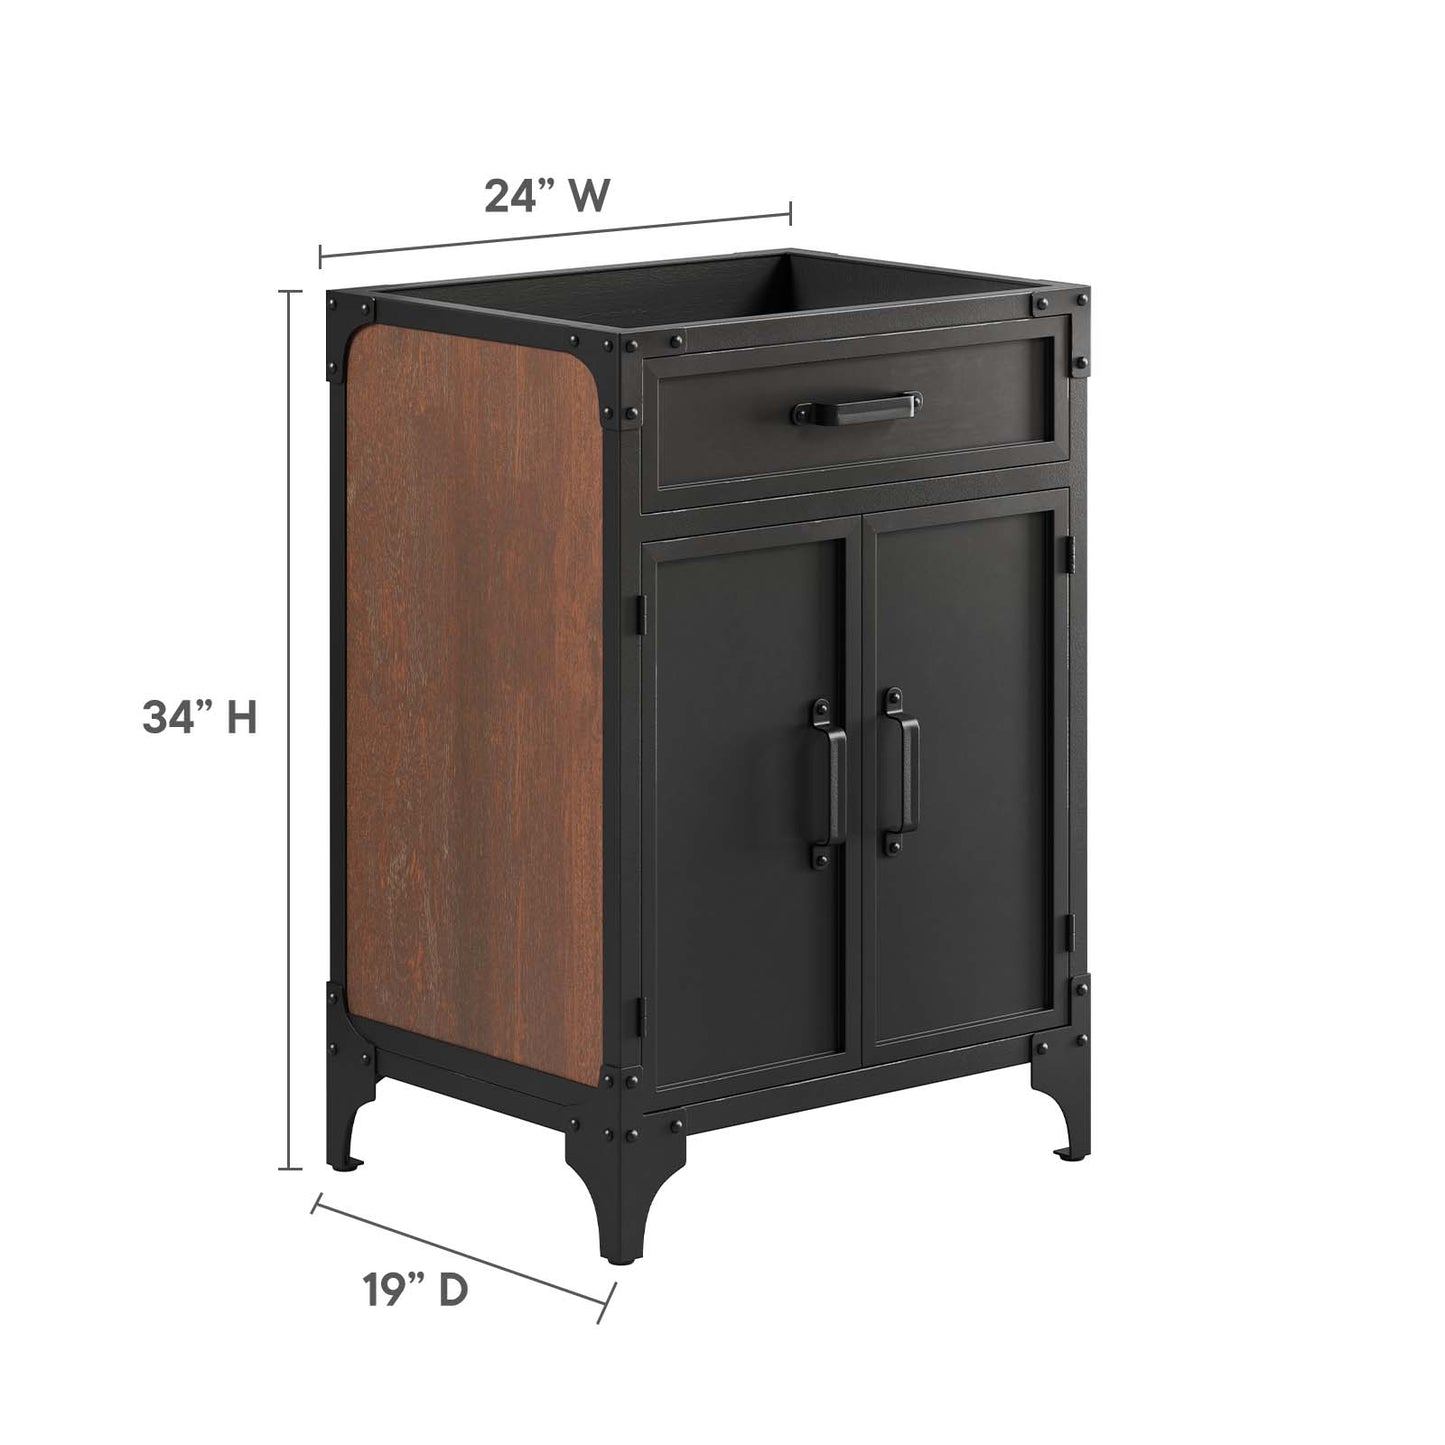 Steamforge 24" Bathroom Vanity Cabinet (Sink Basin Not Included) By Modway - EEI-6127 | Bathroom Accessories | Modway - 7